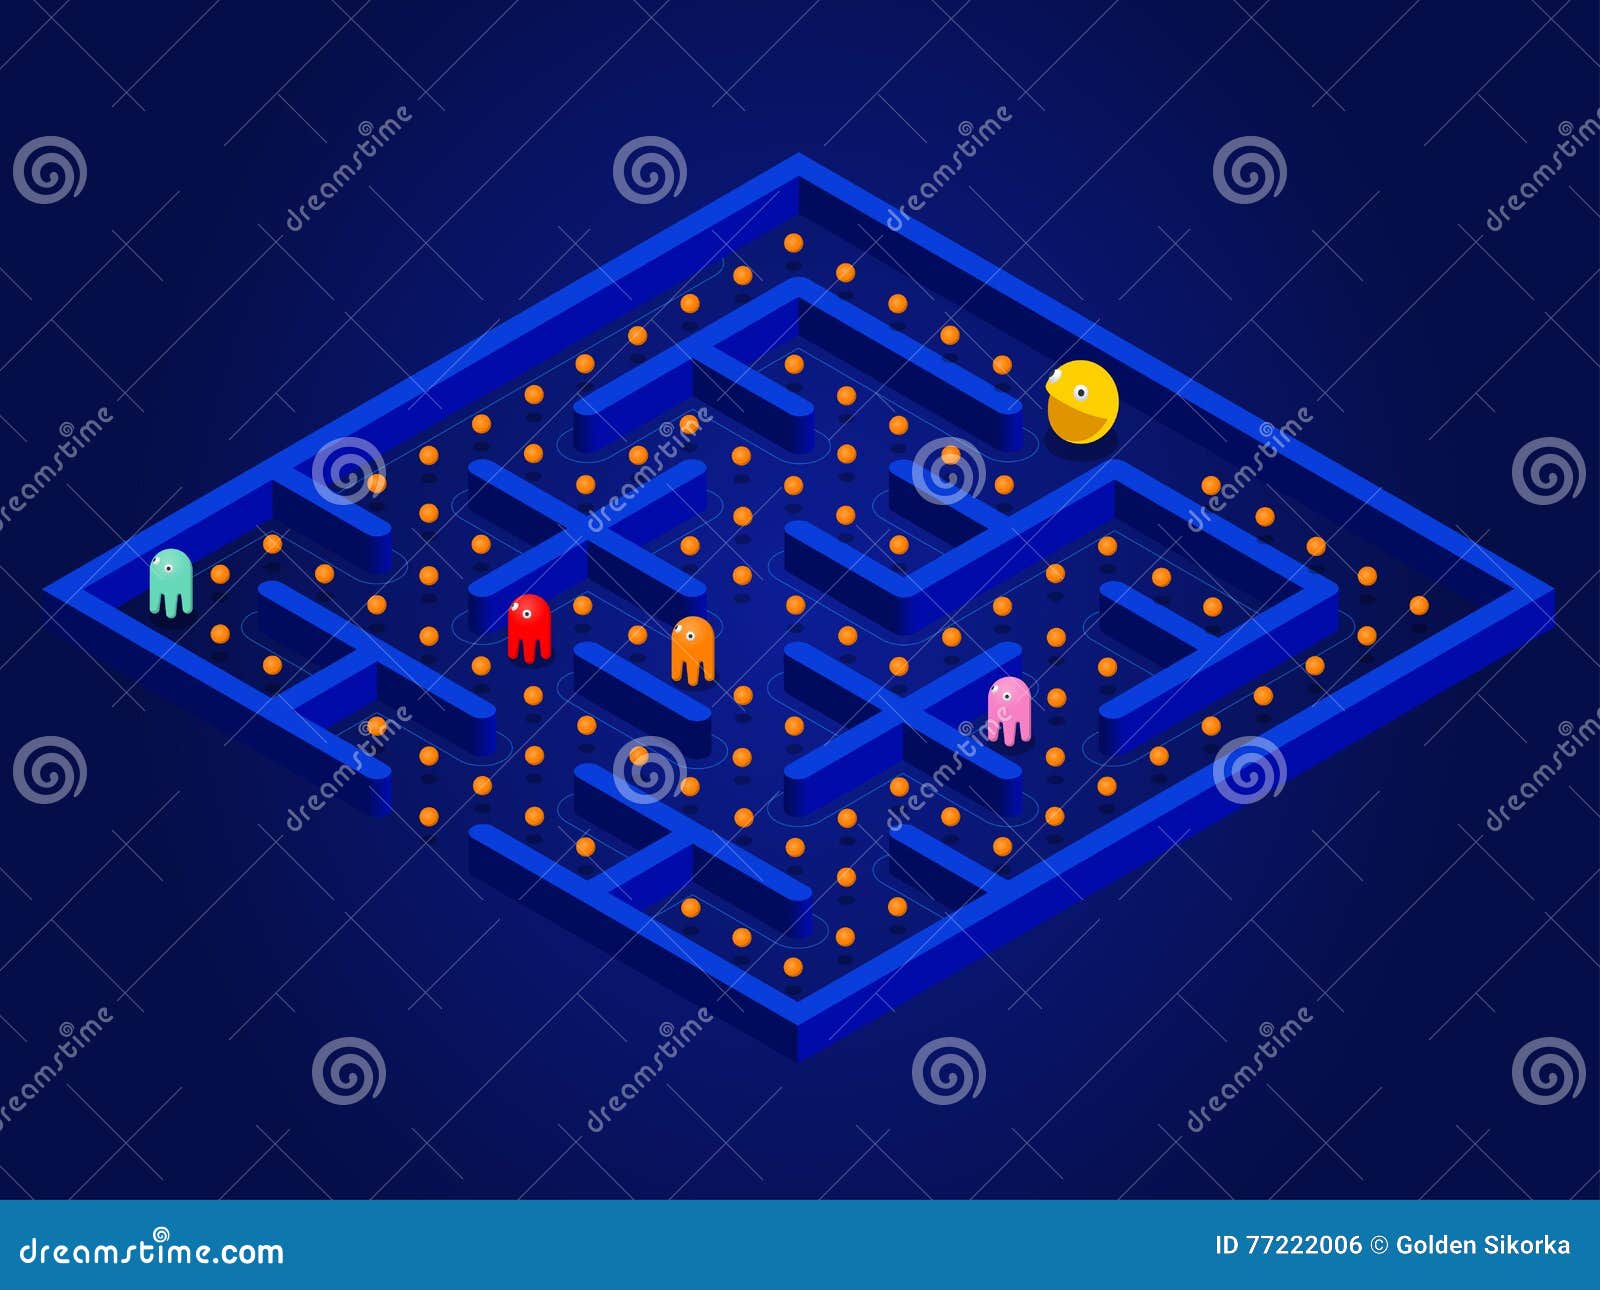 Download Pacman Game With Ghosts, Maze And User Interface. Video ...